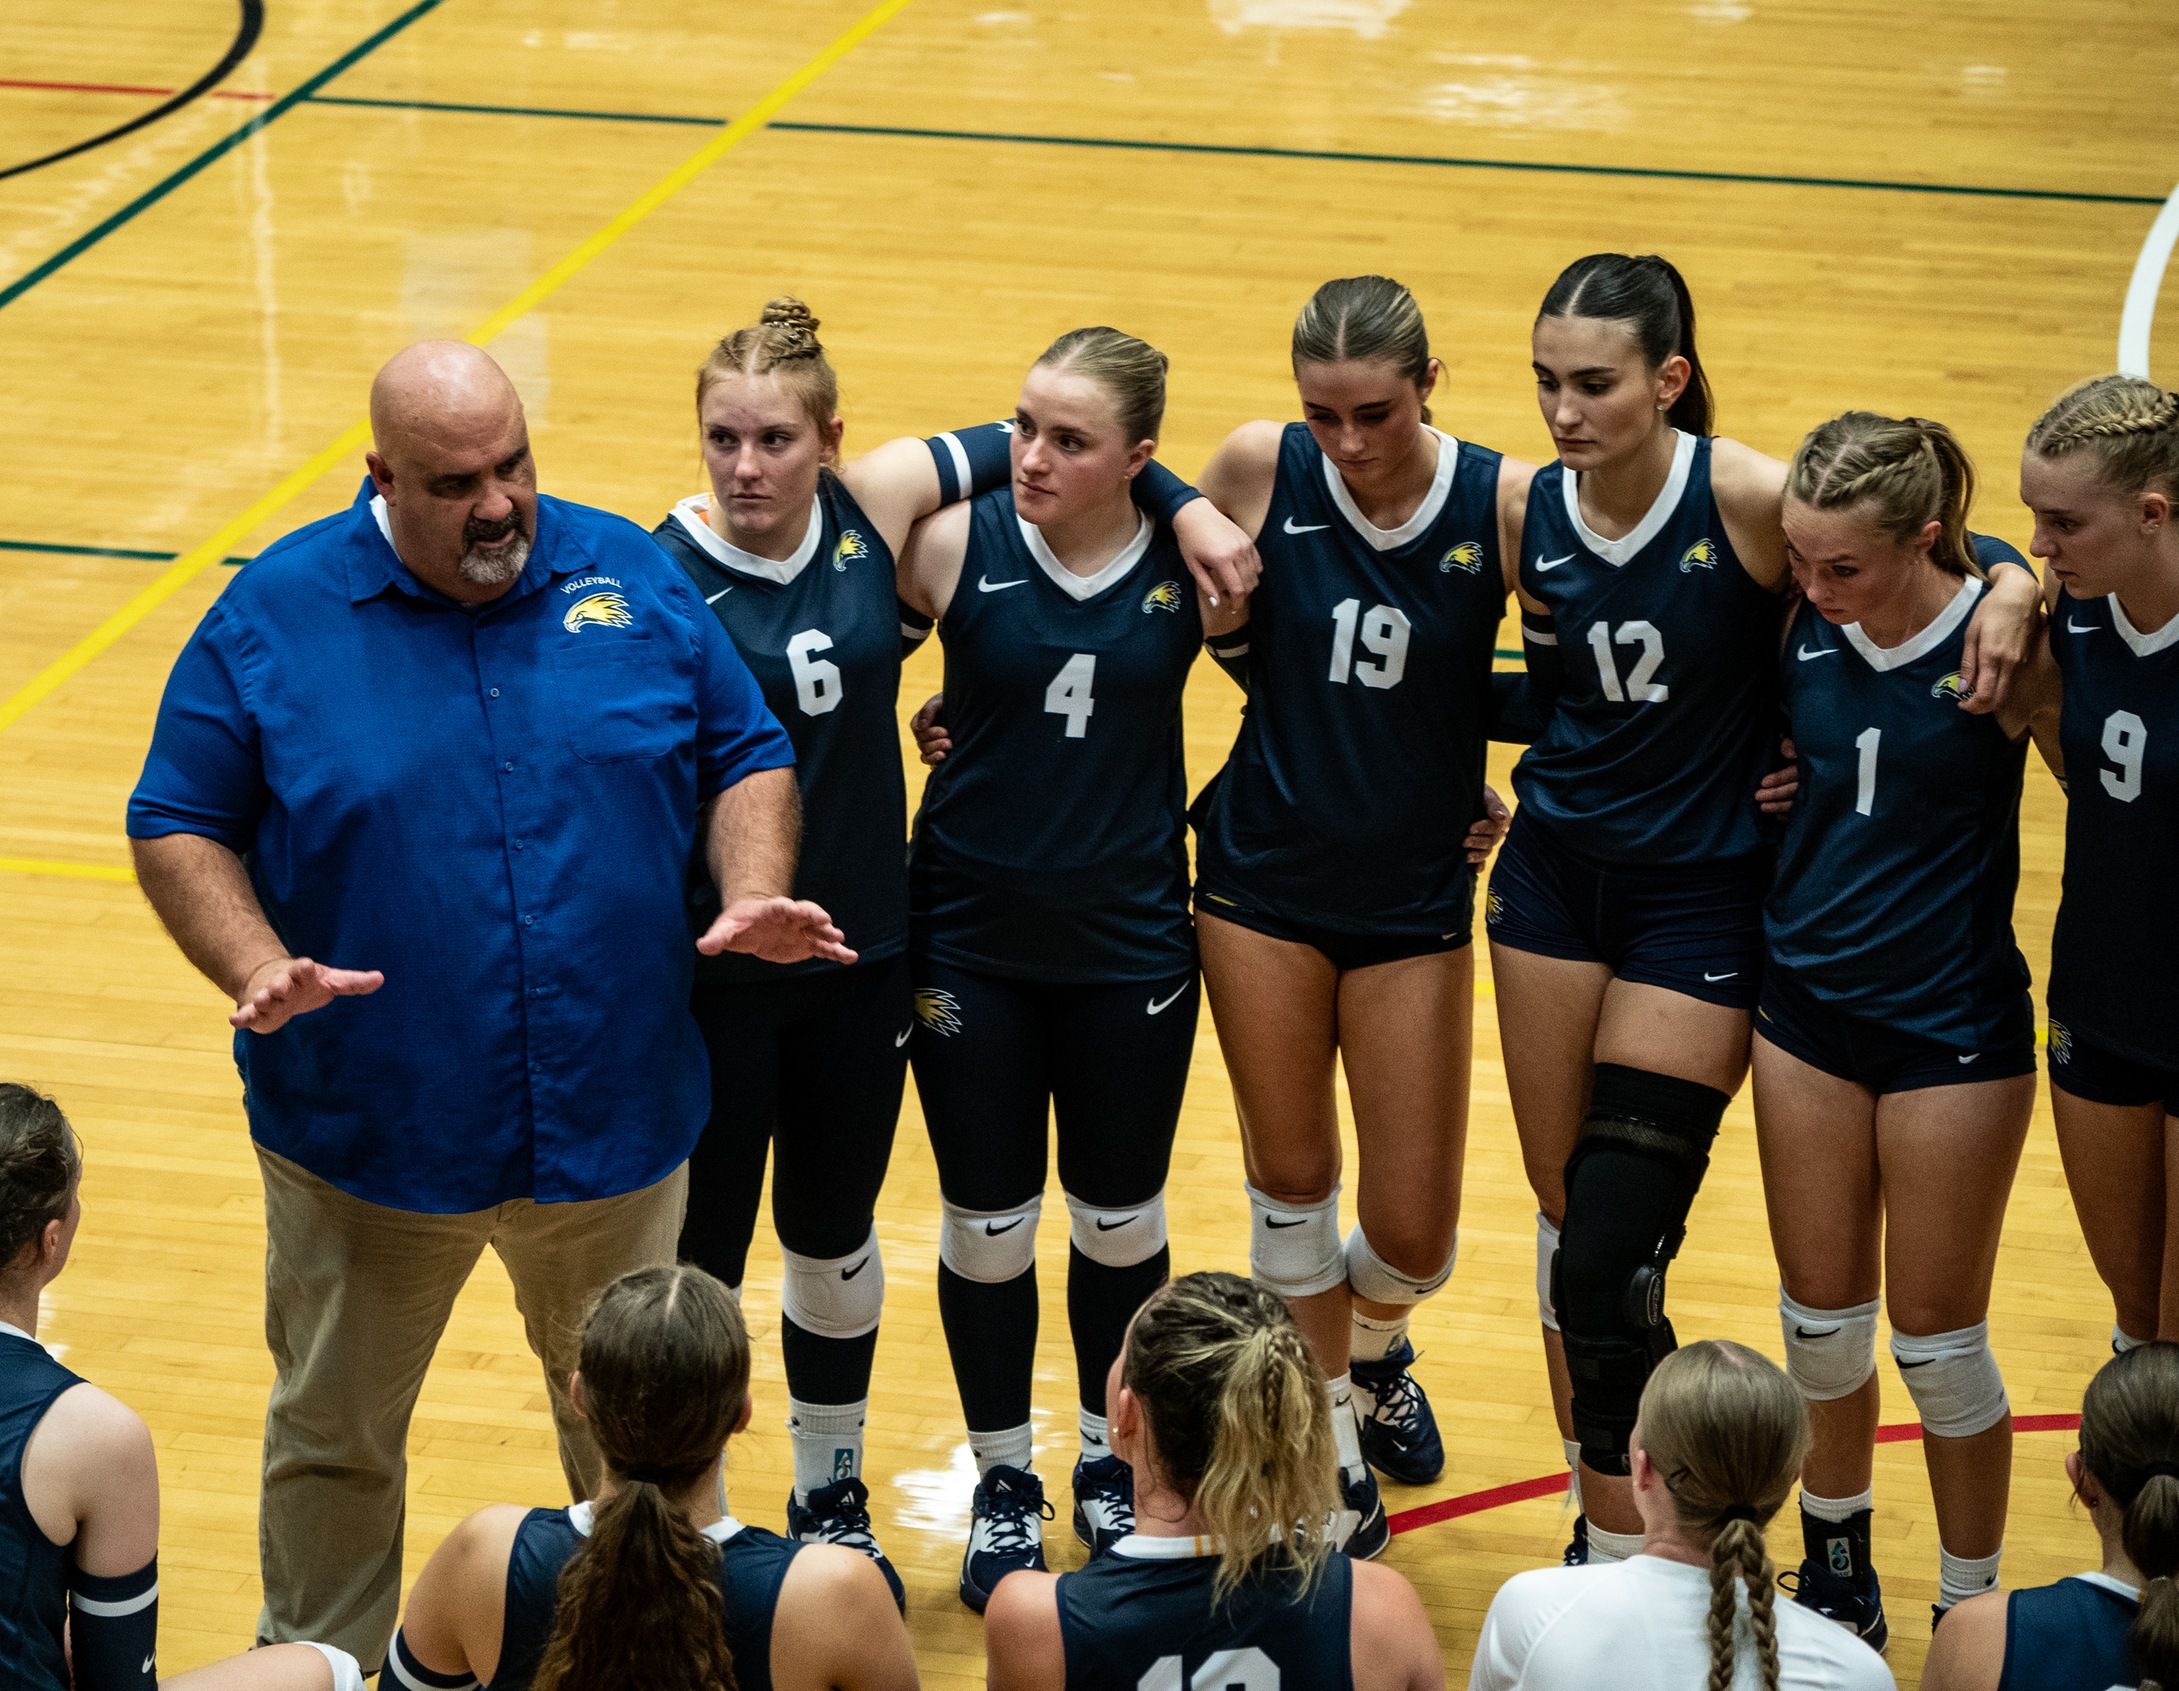 LCCC volleyball drops tough four set match to Missouri State University - West Plains